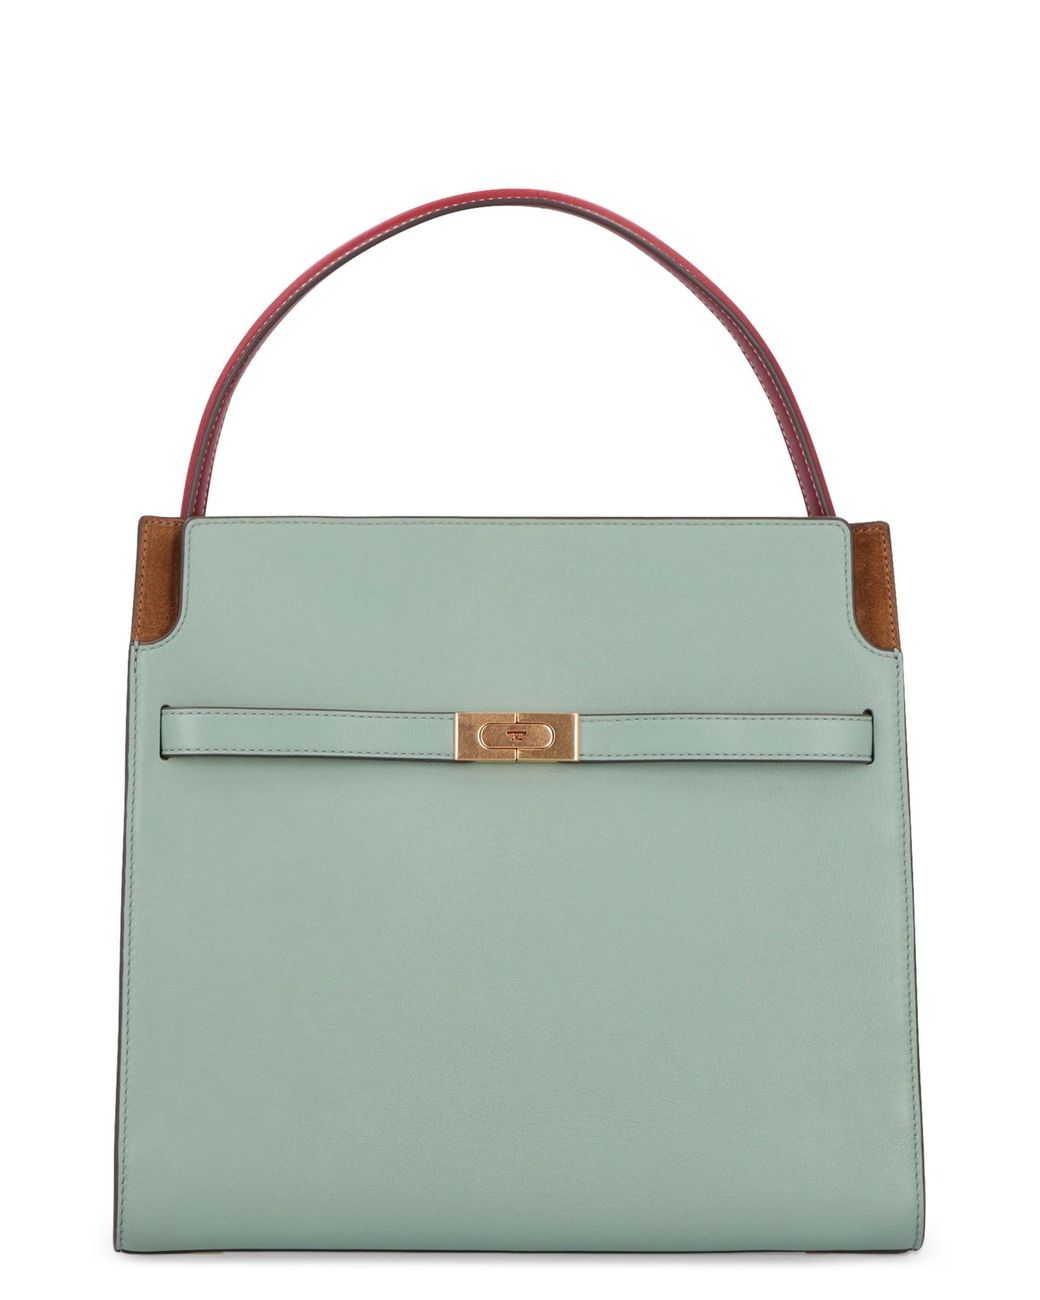 Tory Burch Double Lee Radziwill Leather Bag in Green | Lyst